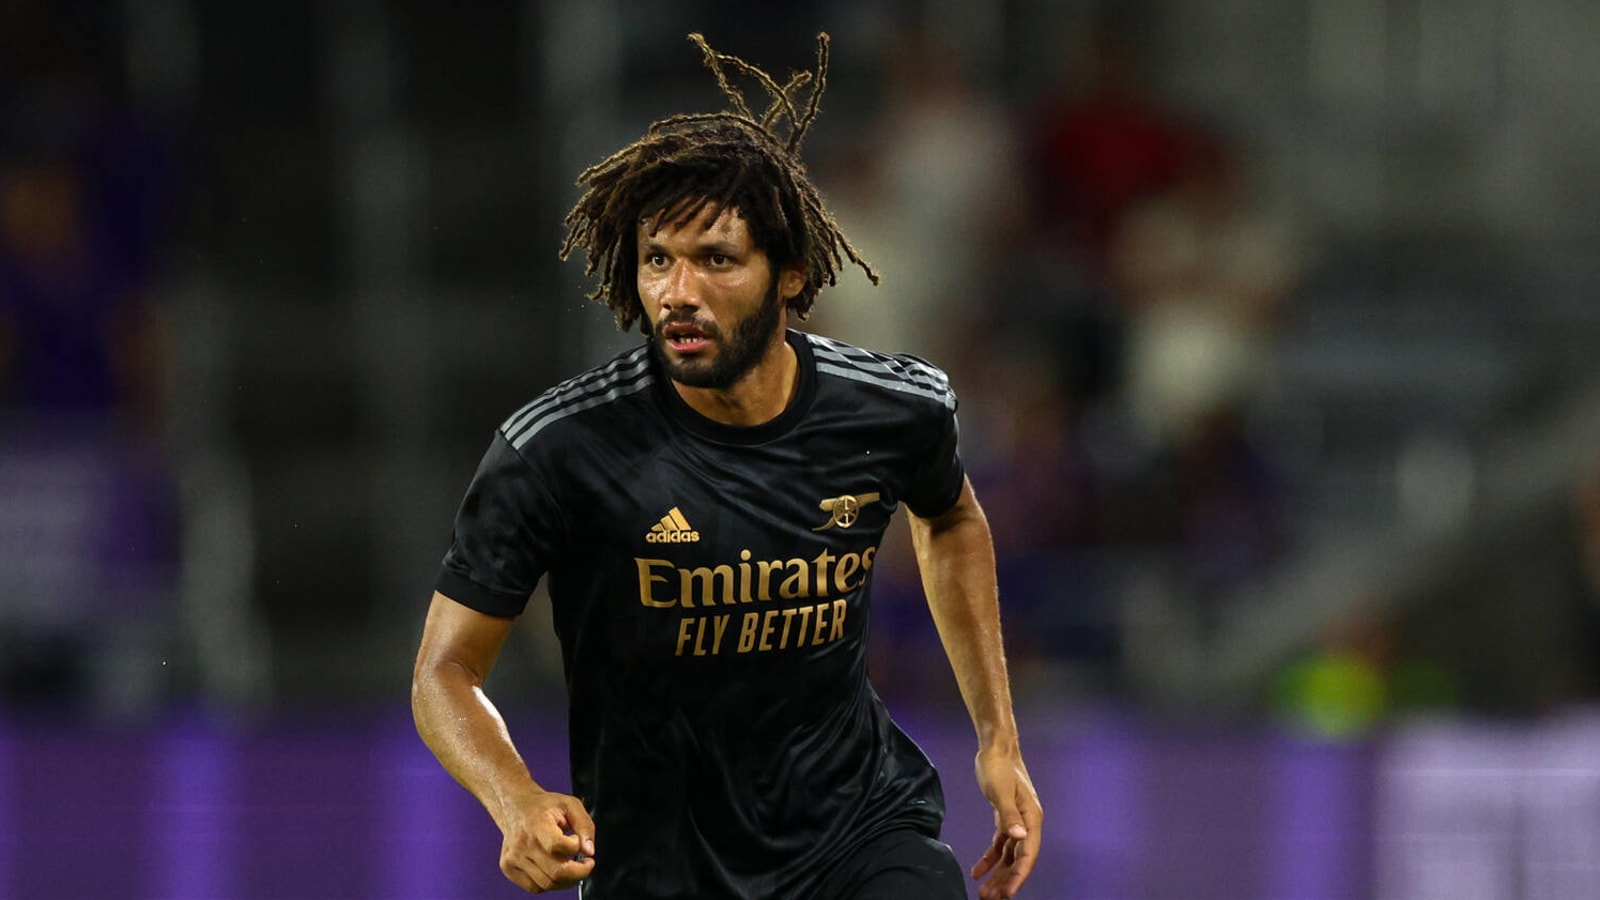 Elneny sends a message to Arsenal’s fans as he departs the Emirates